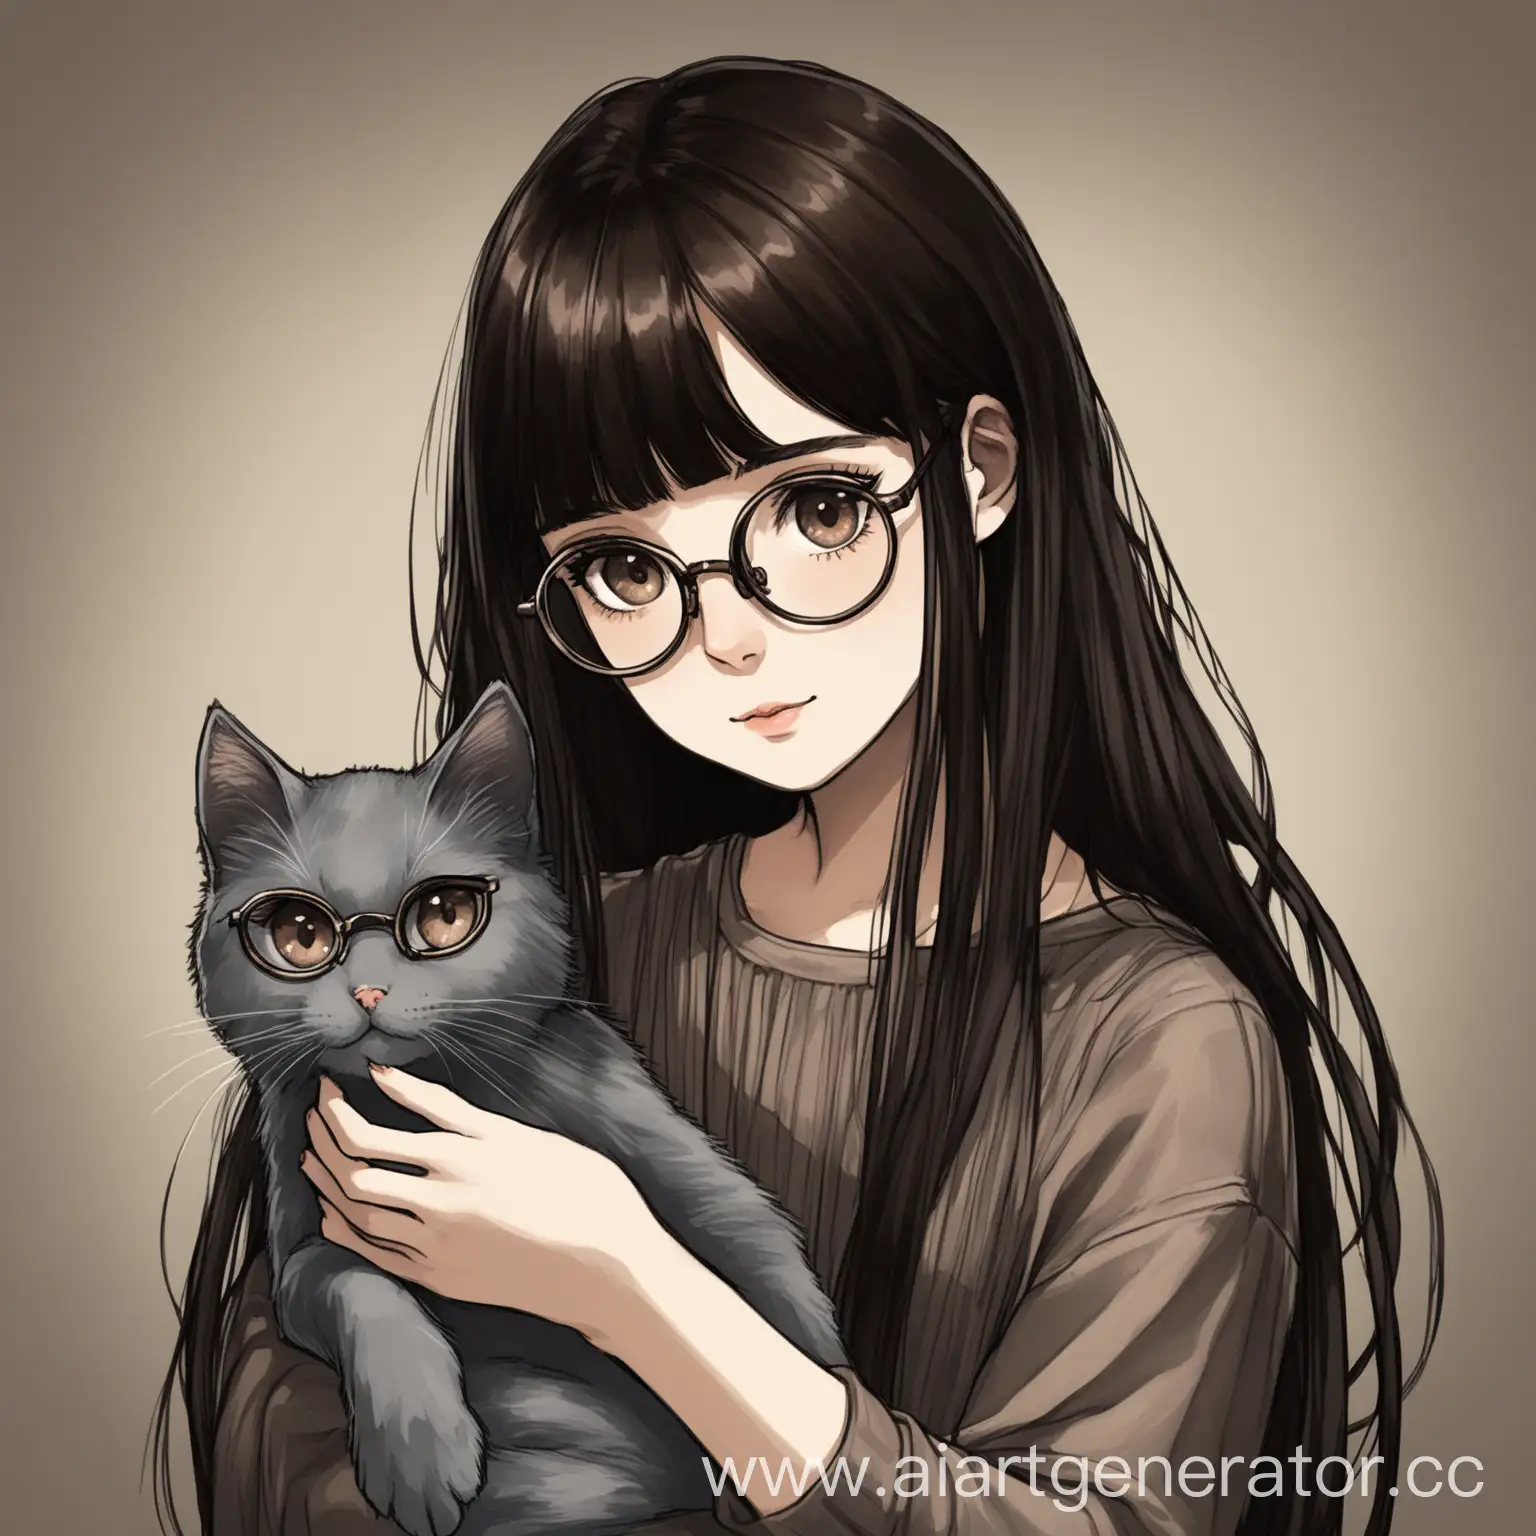 Young-Woman-with-Long-Dark-Hair-Holding-Grey-Cat